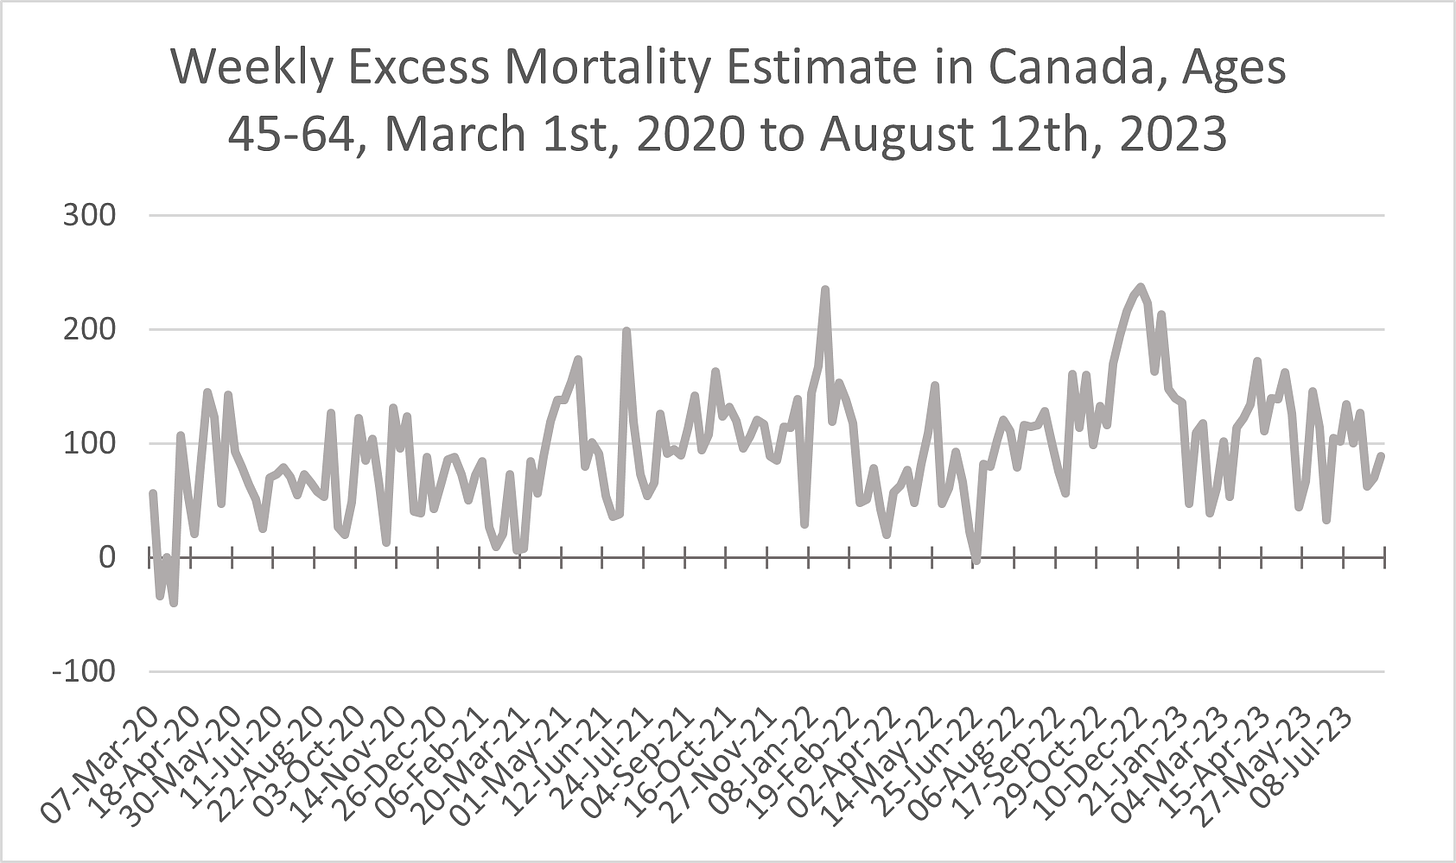 Line chart showing weekly excess mortality in Canada among those aged 45-64 from March 1st, 2020 to August 12th, 2023. The figure is above 0 for the most part (indicating more deaths than expected) from April 2020 onwards, fluctuating between 0 and about 250, reaching the highest points in January 2022 and December 2022.